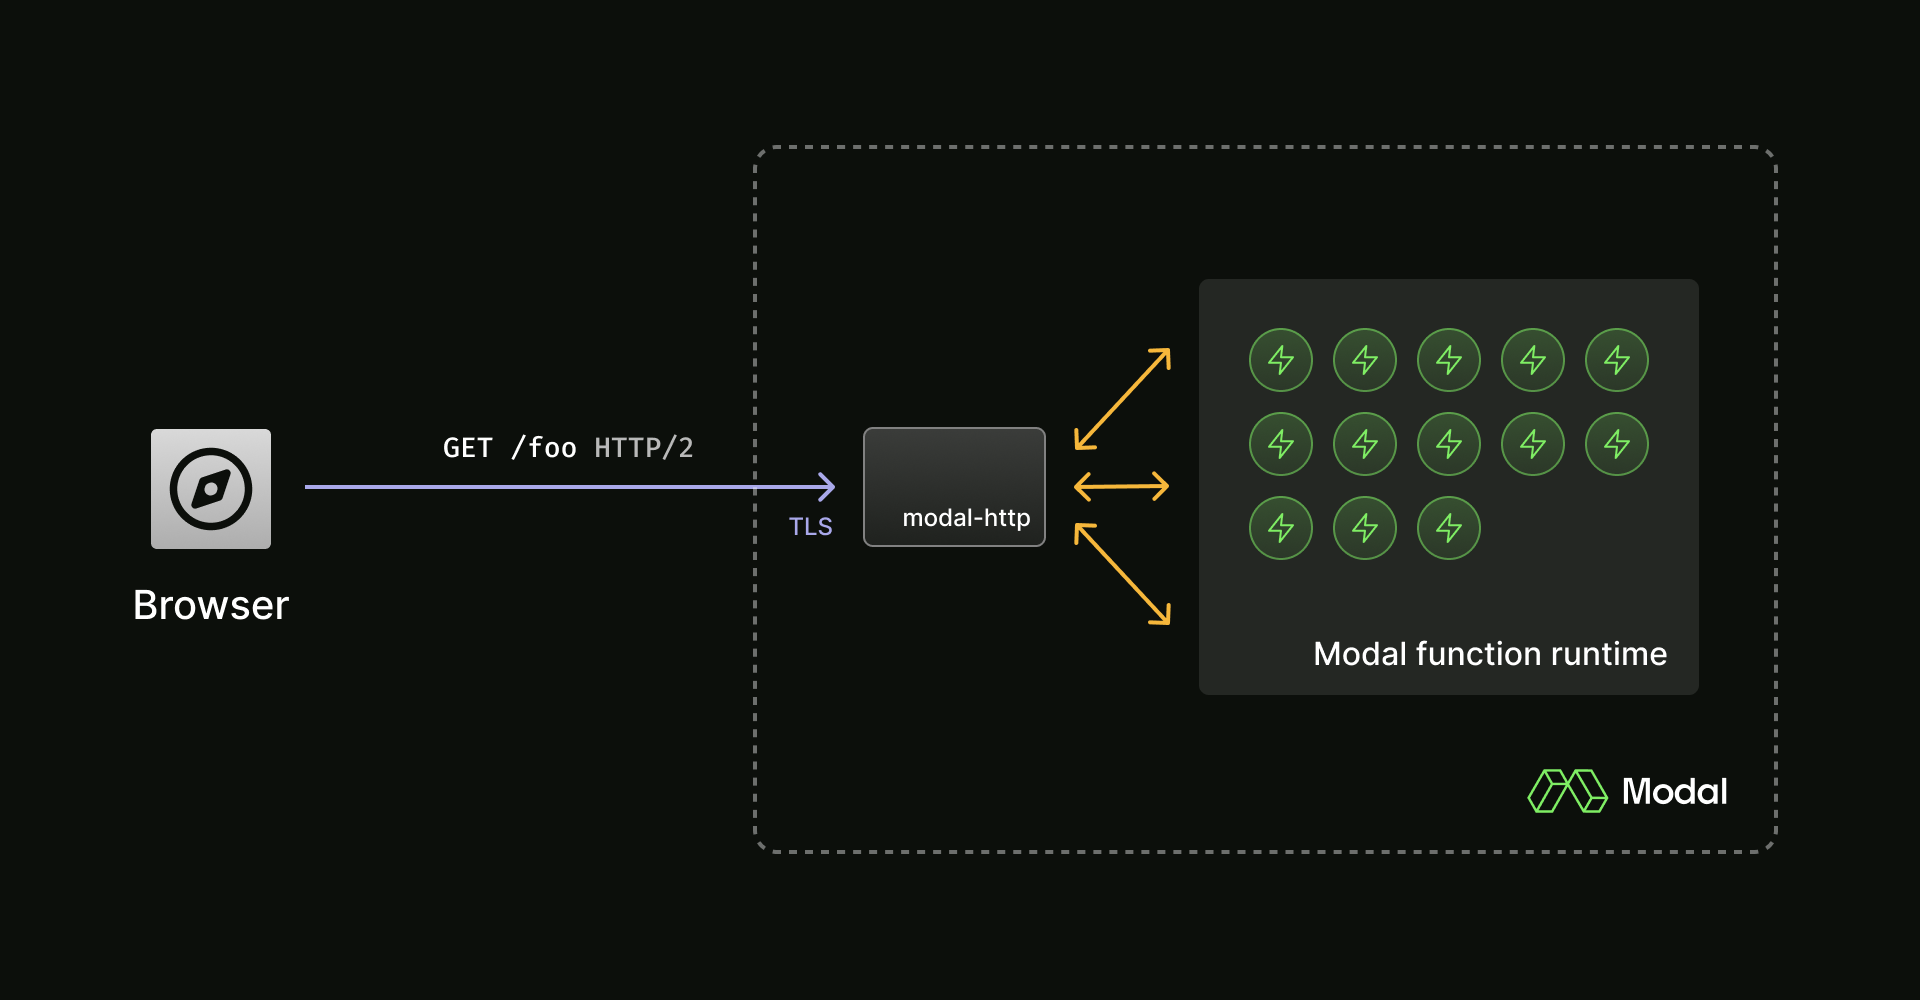 Simple schematic with modal-http at the center